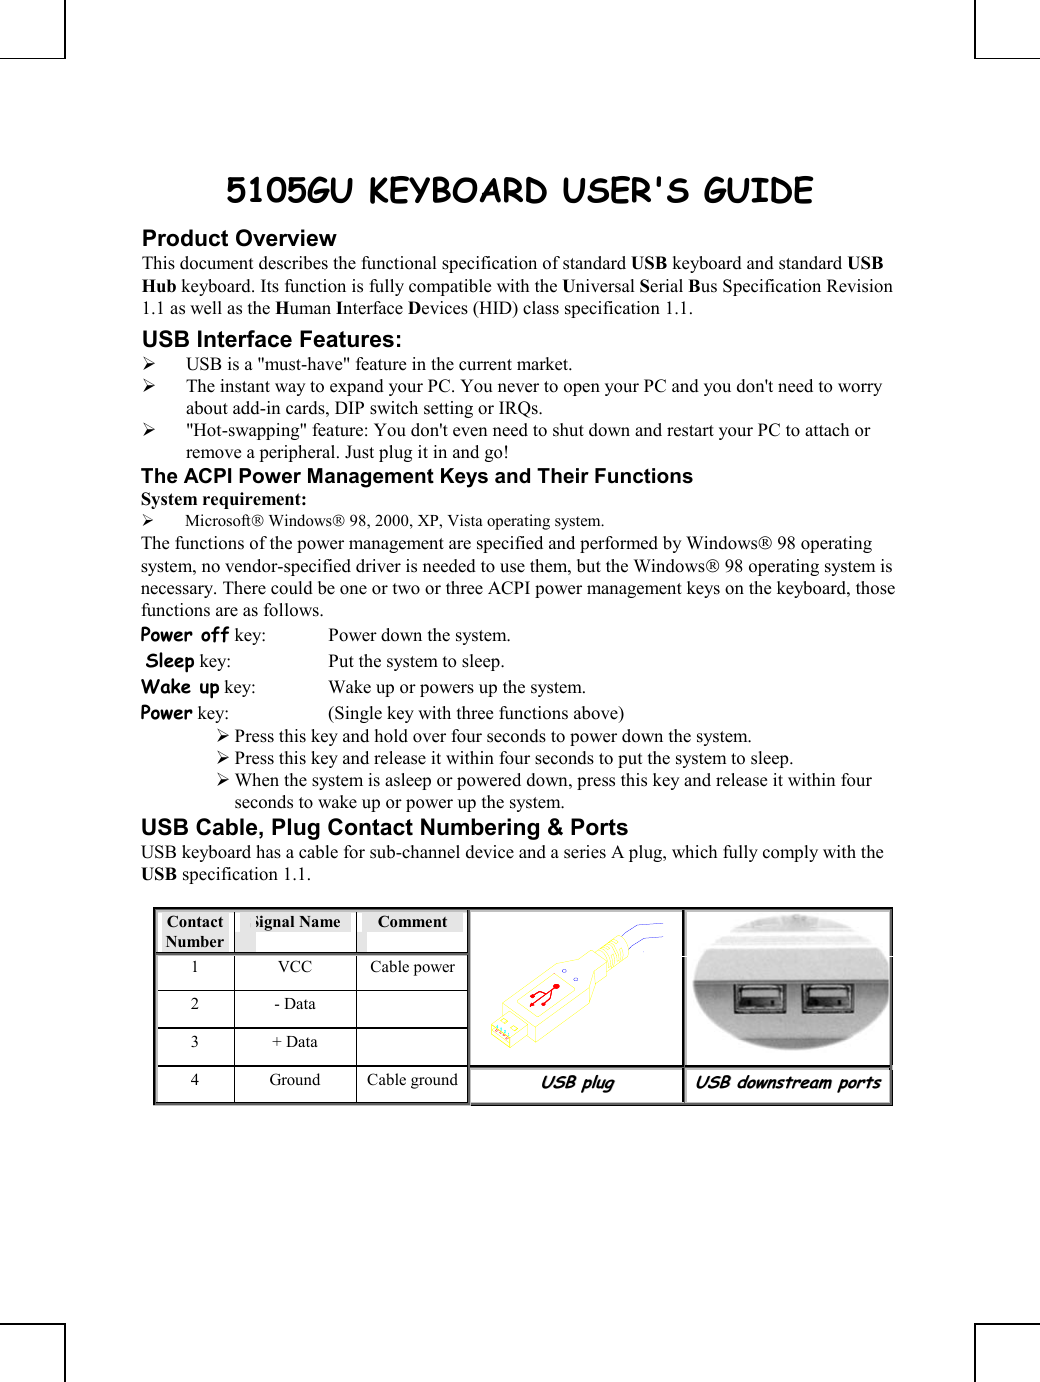       5105GU KEYBOARD USER&apos;S GUIDE Product Overview This document describes the functional specification of standard USB keyboard and standard USB Hub keyboard. Its function is fully compatible with the Universal Serial Bus Specification Revision 1.1 as well as the Human Interface Devices (HID) class specification 1.1. USB Interface Features:   USB is a &quot;must-have&quot; feature in the current market.   The instant way to expand your PC. You never to open your PC and you don&apos;t need to worry about add-in cards, DIP switch setting or IRQs.   &quot;Hot-swapping&quot; feature: You don&apos;t even need to shut down and restart your PC to attach or remove a peripheral. Just plug it in and go! The ACPI Power Management Keys and Their Functions System requirement:    Microsoft Windows 98, 2000, XP, Vista operating system. The functions of the power management are specified and performed by Windows 98 operating system, no vendor-specified driver is needed to use them, but the Windows 98 operating system is necessary. There could be one or two or three ACPI power management keys on the keyboard, those functions are as follows. Power off key:  Power down the system.  Sleep key:  Put the system to sleep.  Wake up key:  Wake up or powers up the system.  Power key:  (Single key with three functions above)       Press this key and hold over four seconds to power down the system.  Press this key and release it within four seconds to put the system to sleep.  When the system is asleep or powered down, press this key and release it within four seconds to wake up or power up the system. USB Cable, Plug Contact Numbering &amp; Ports USB keyboard has a cable for sub-channel device and a series A plug, which fully comply with the USB specification 1.1.  Contact Number Signal Name   Comment 1 VCC Cable power2 - Data   3 + Data    4 Ground Cable groundUUSSBB  pplluugg  UUSSBB  ddoowwnnssttrreeaamm  ppoorrttss    